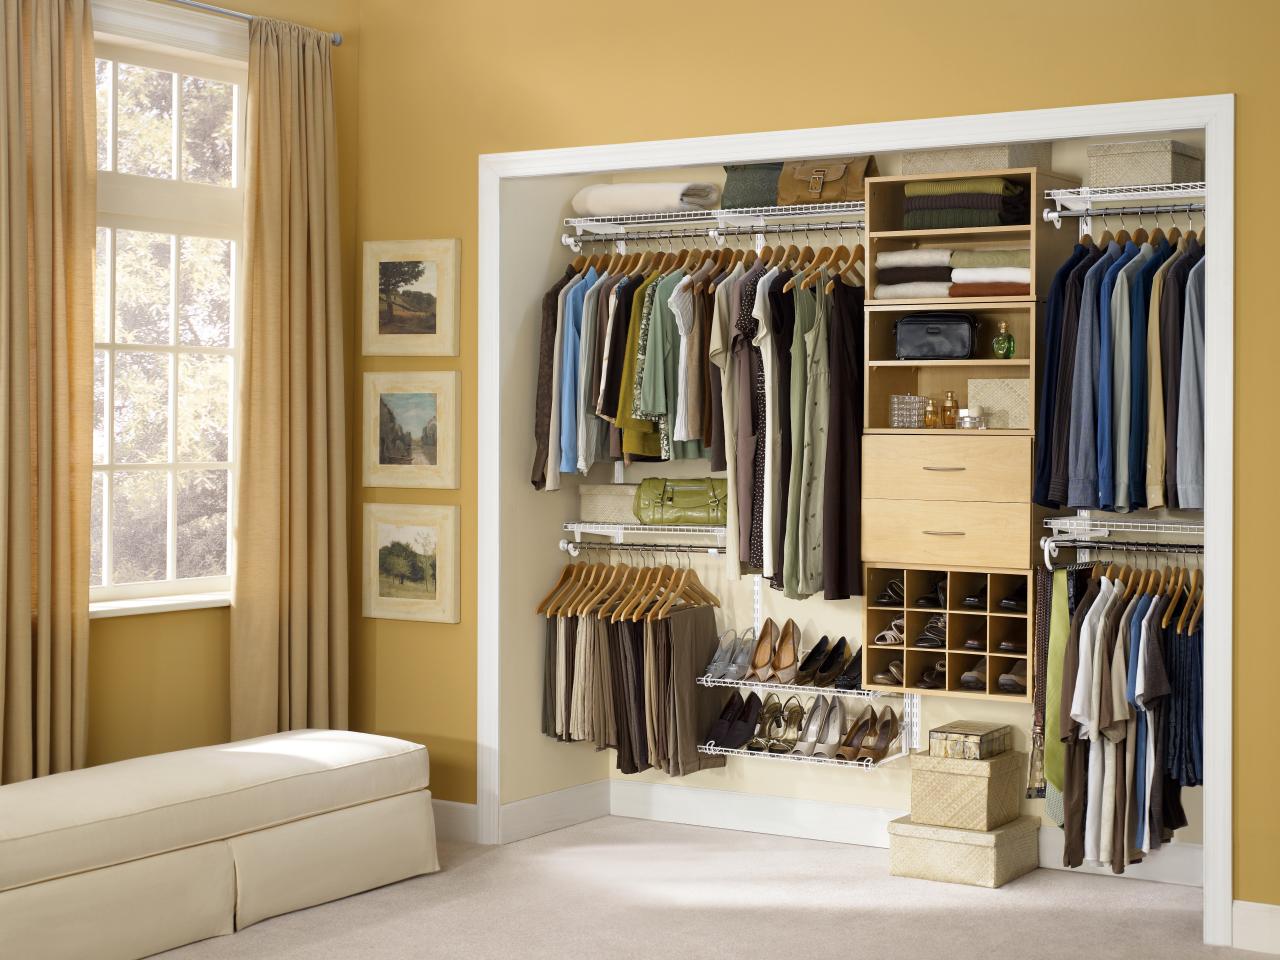 Create an Effective and Efficient Closet